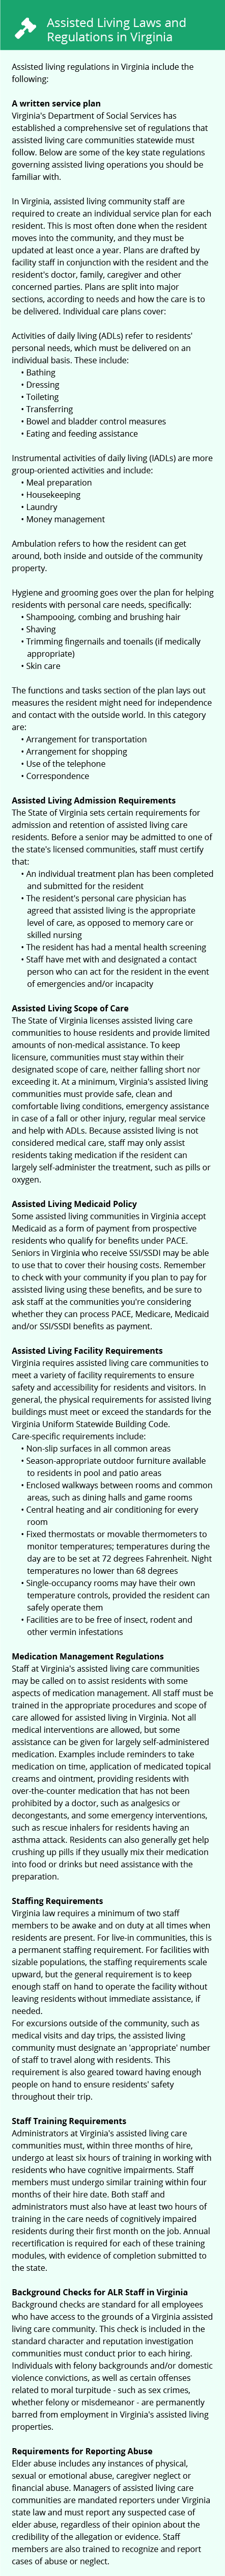 Laws and Regulations in Virginia